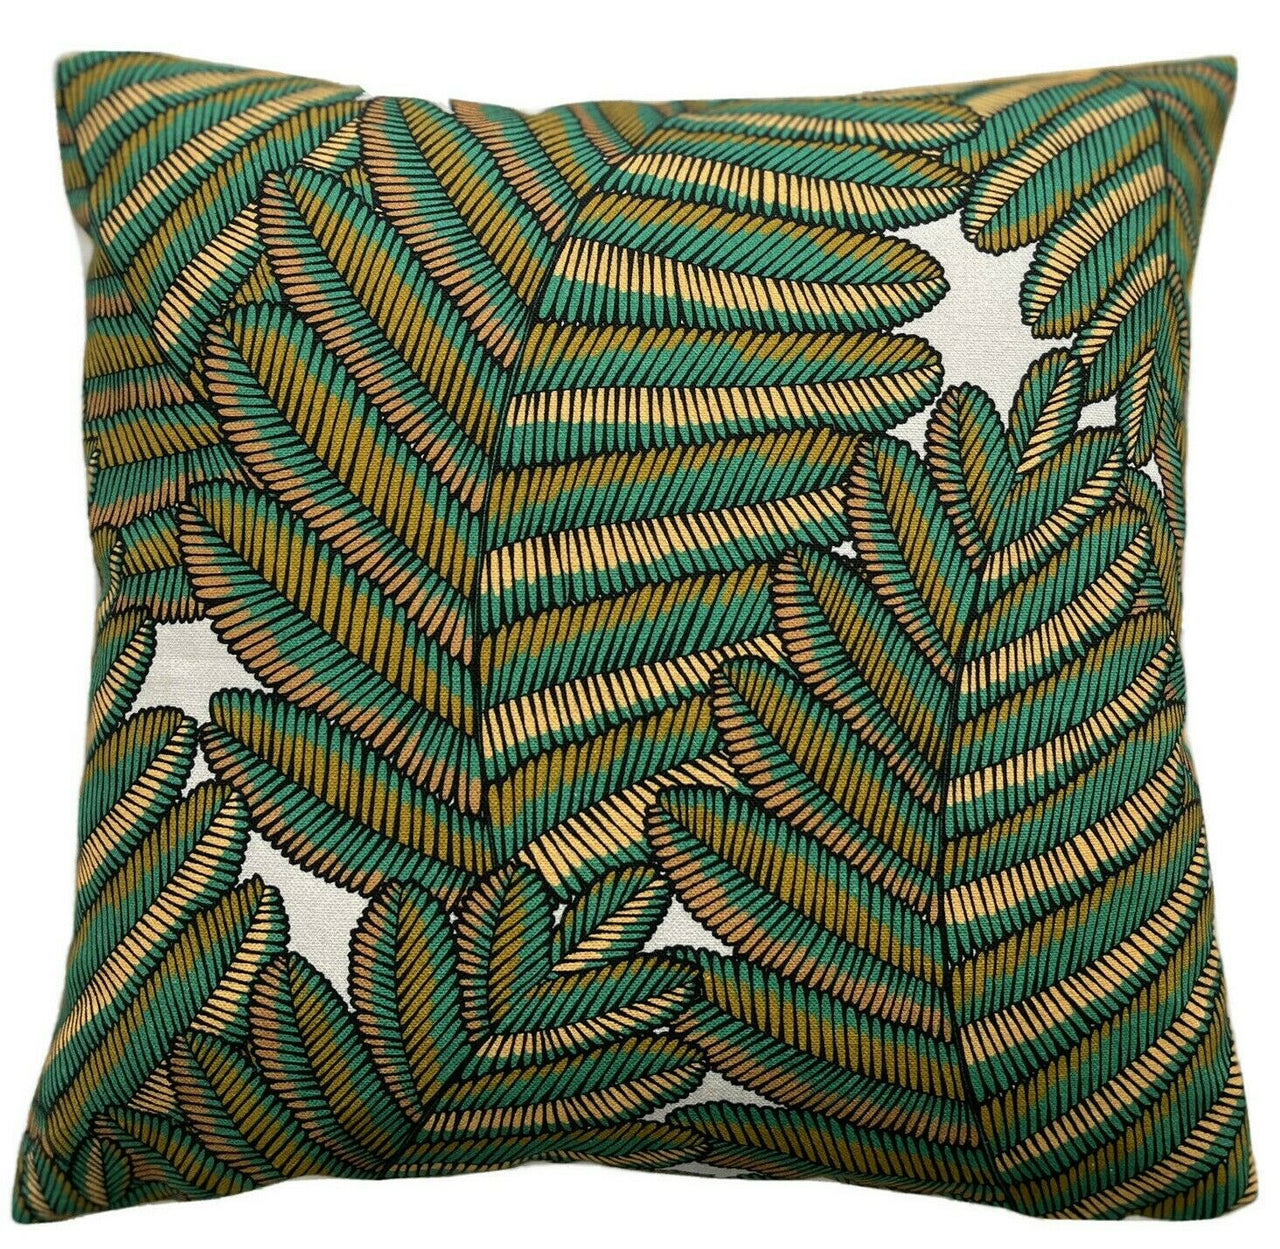 Fern Sofa Throw Pillow Cover Green Cotton Cushion Cover Botanical Couch Decor Plants Grey Yellow Gold Leaves Pattern Kew Garden